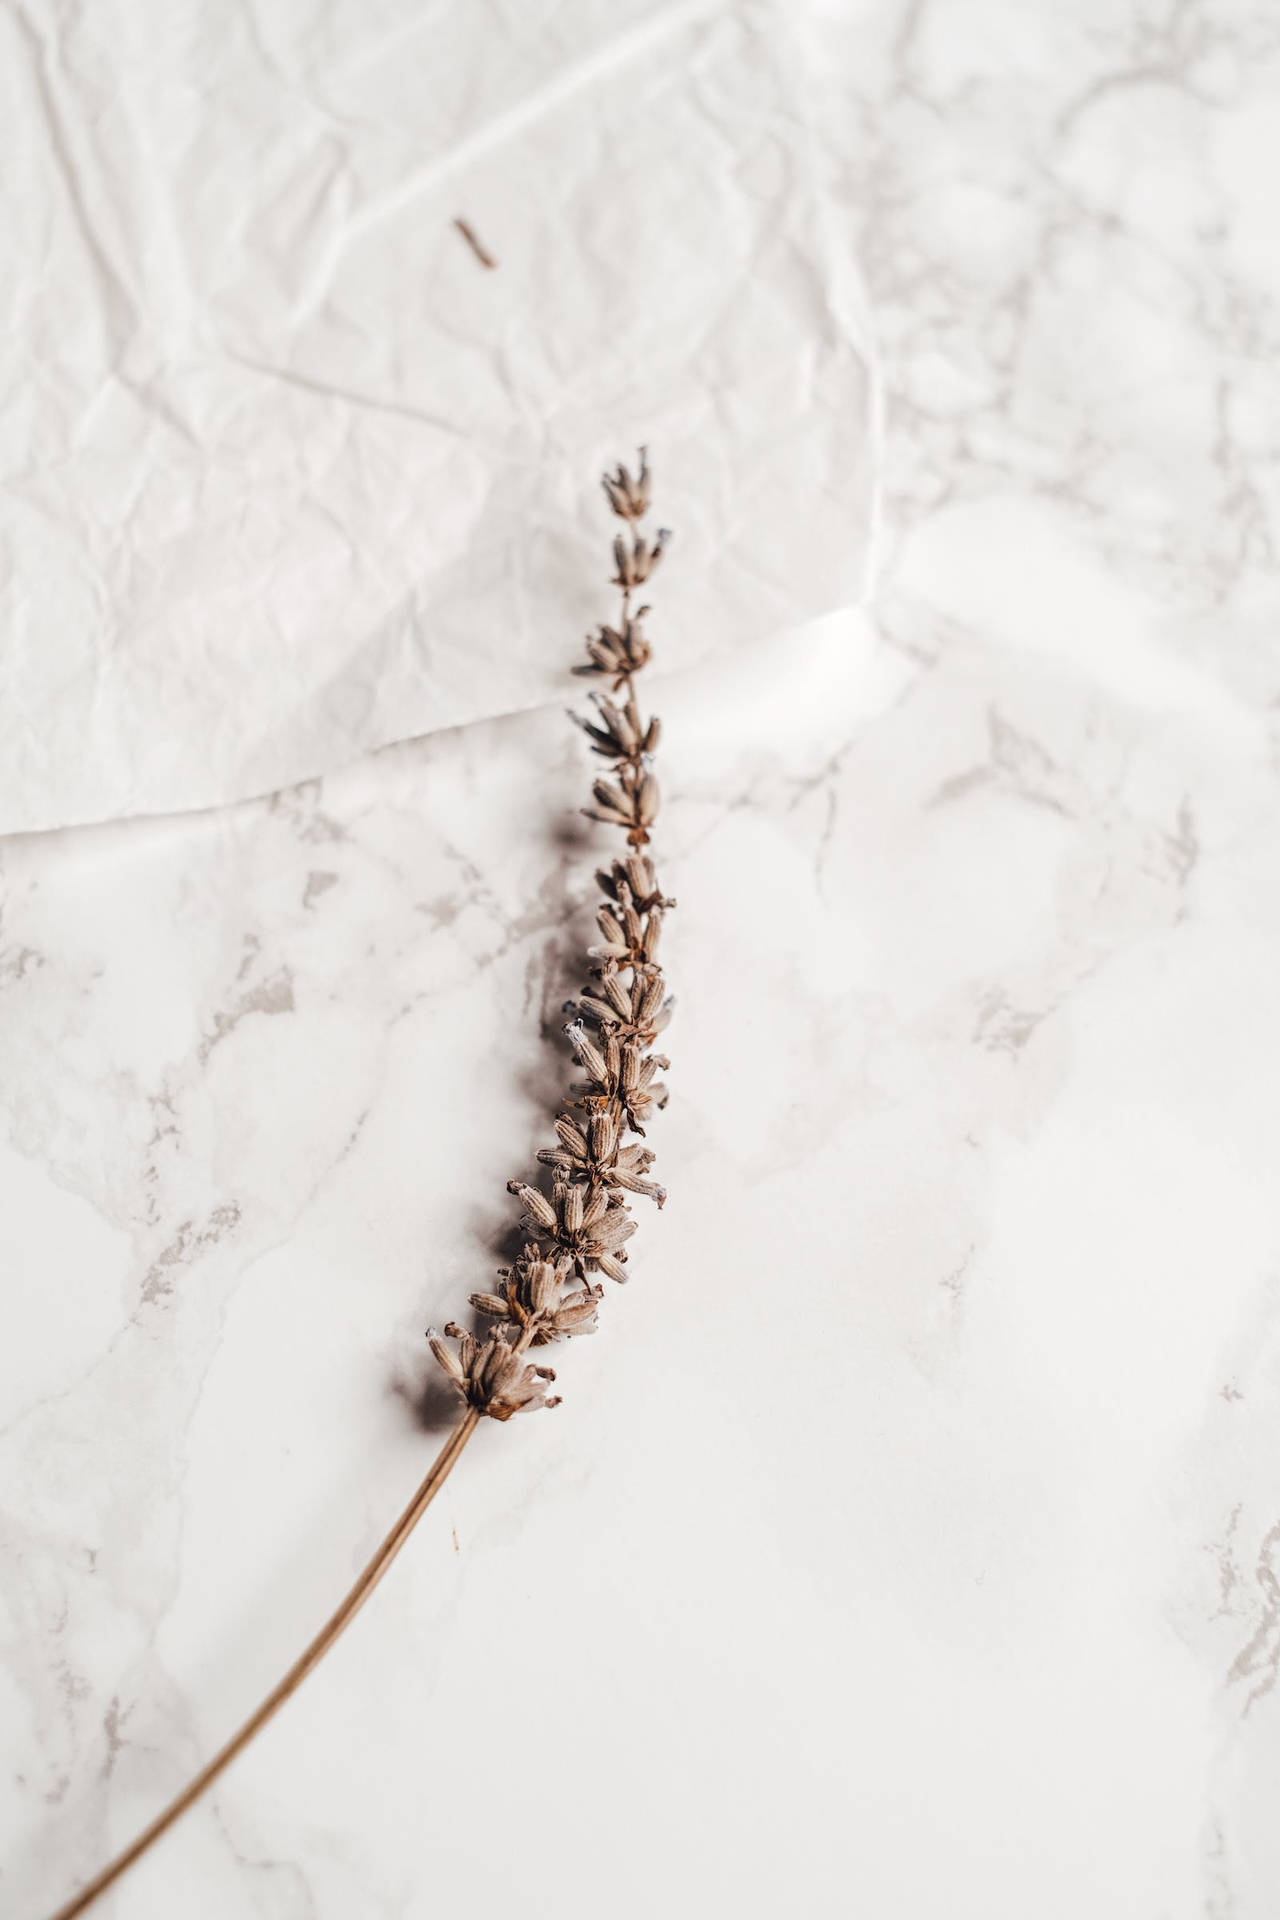 Dried Flower On Aesthetic Marble Surface